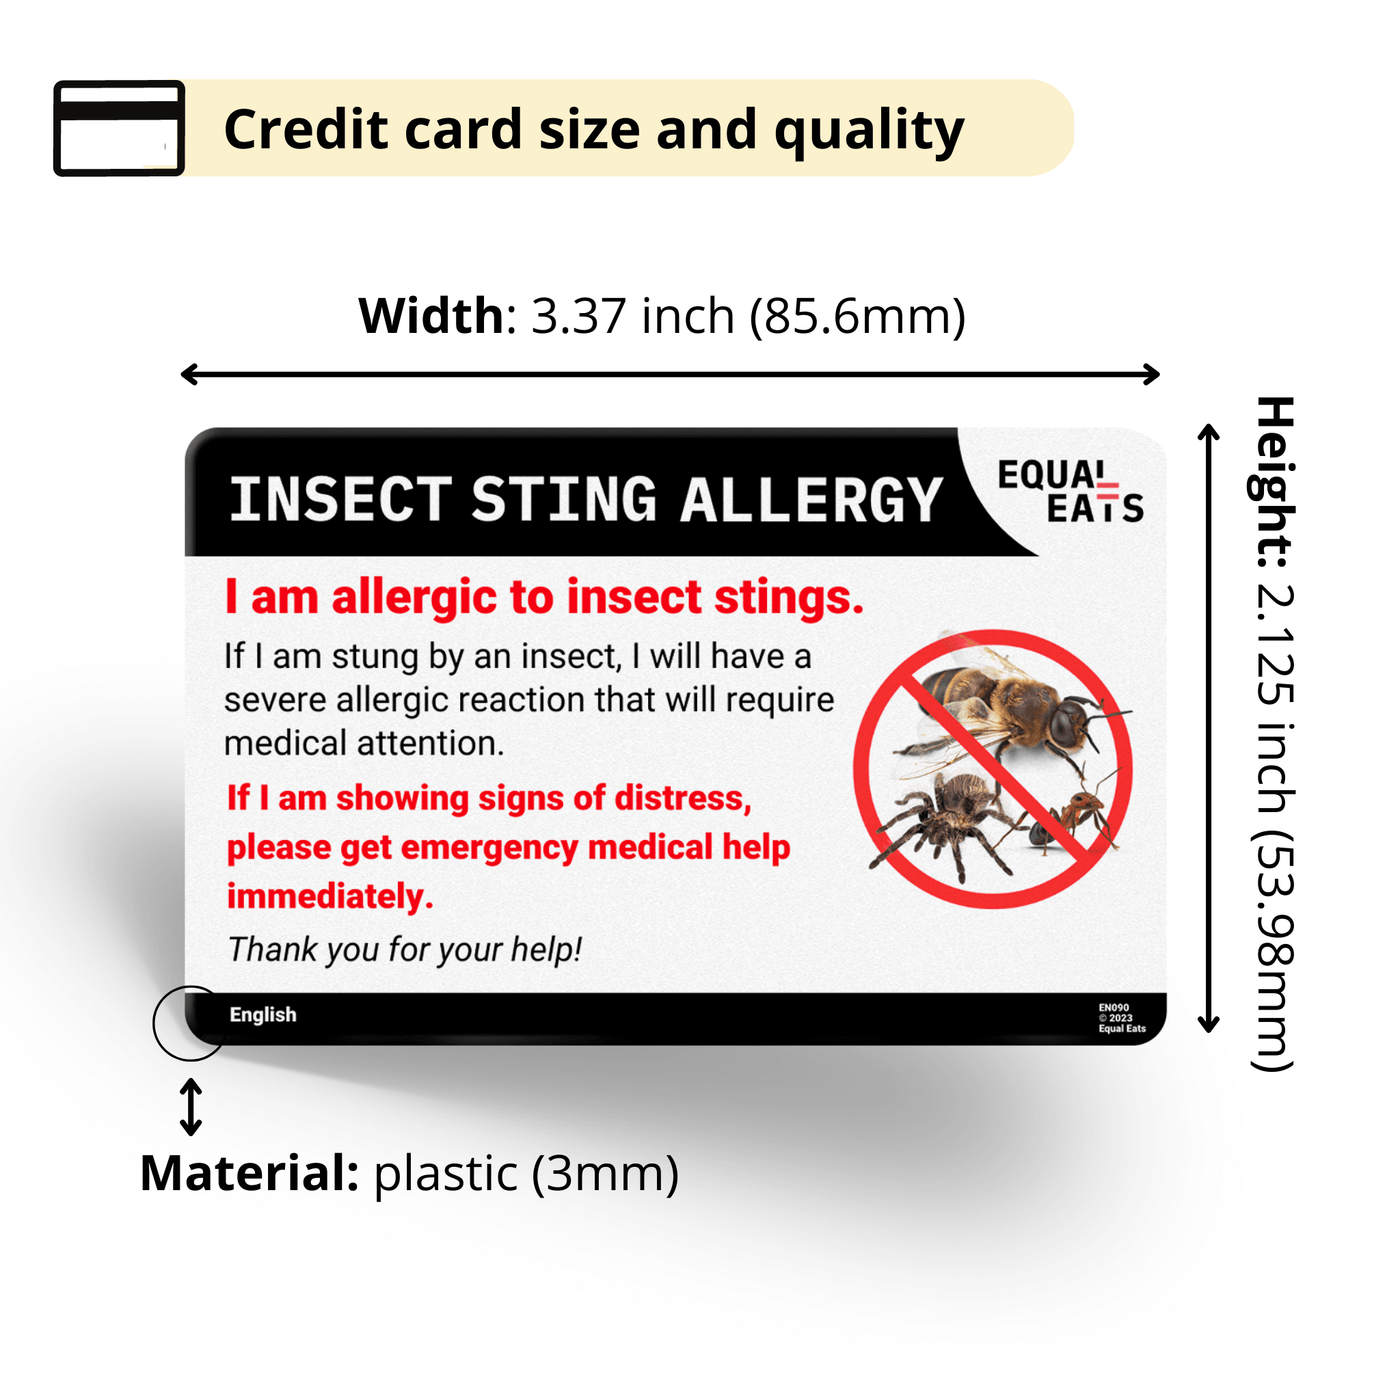 Tagalog Insect Sting Allergy Card